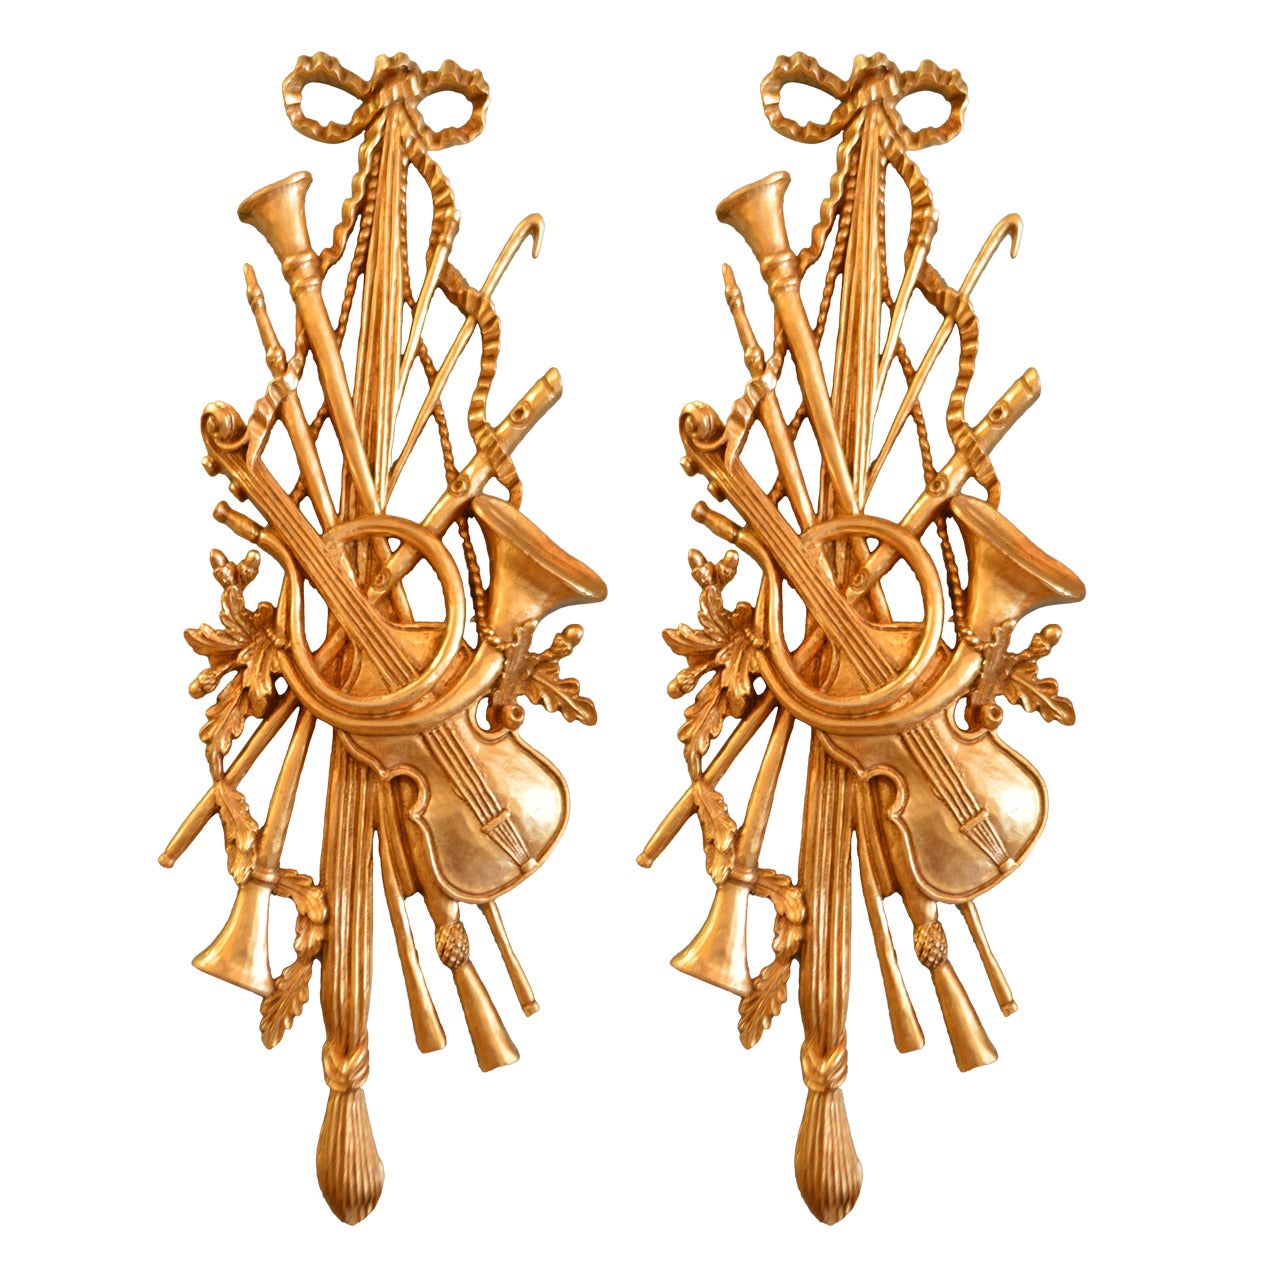 Pair of 19th Century Musical Theme Gilded Wall Ornaments